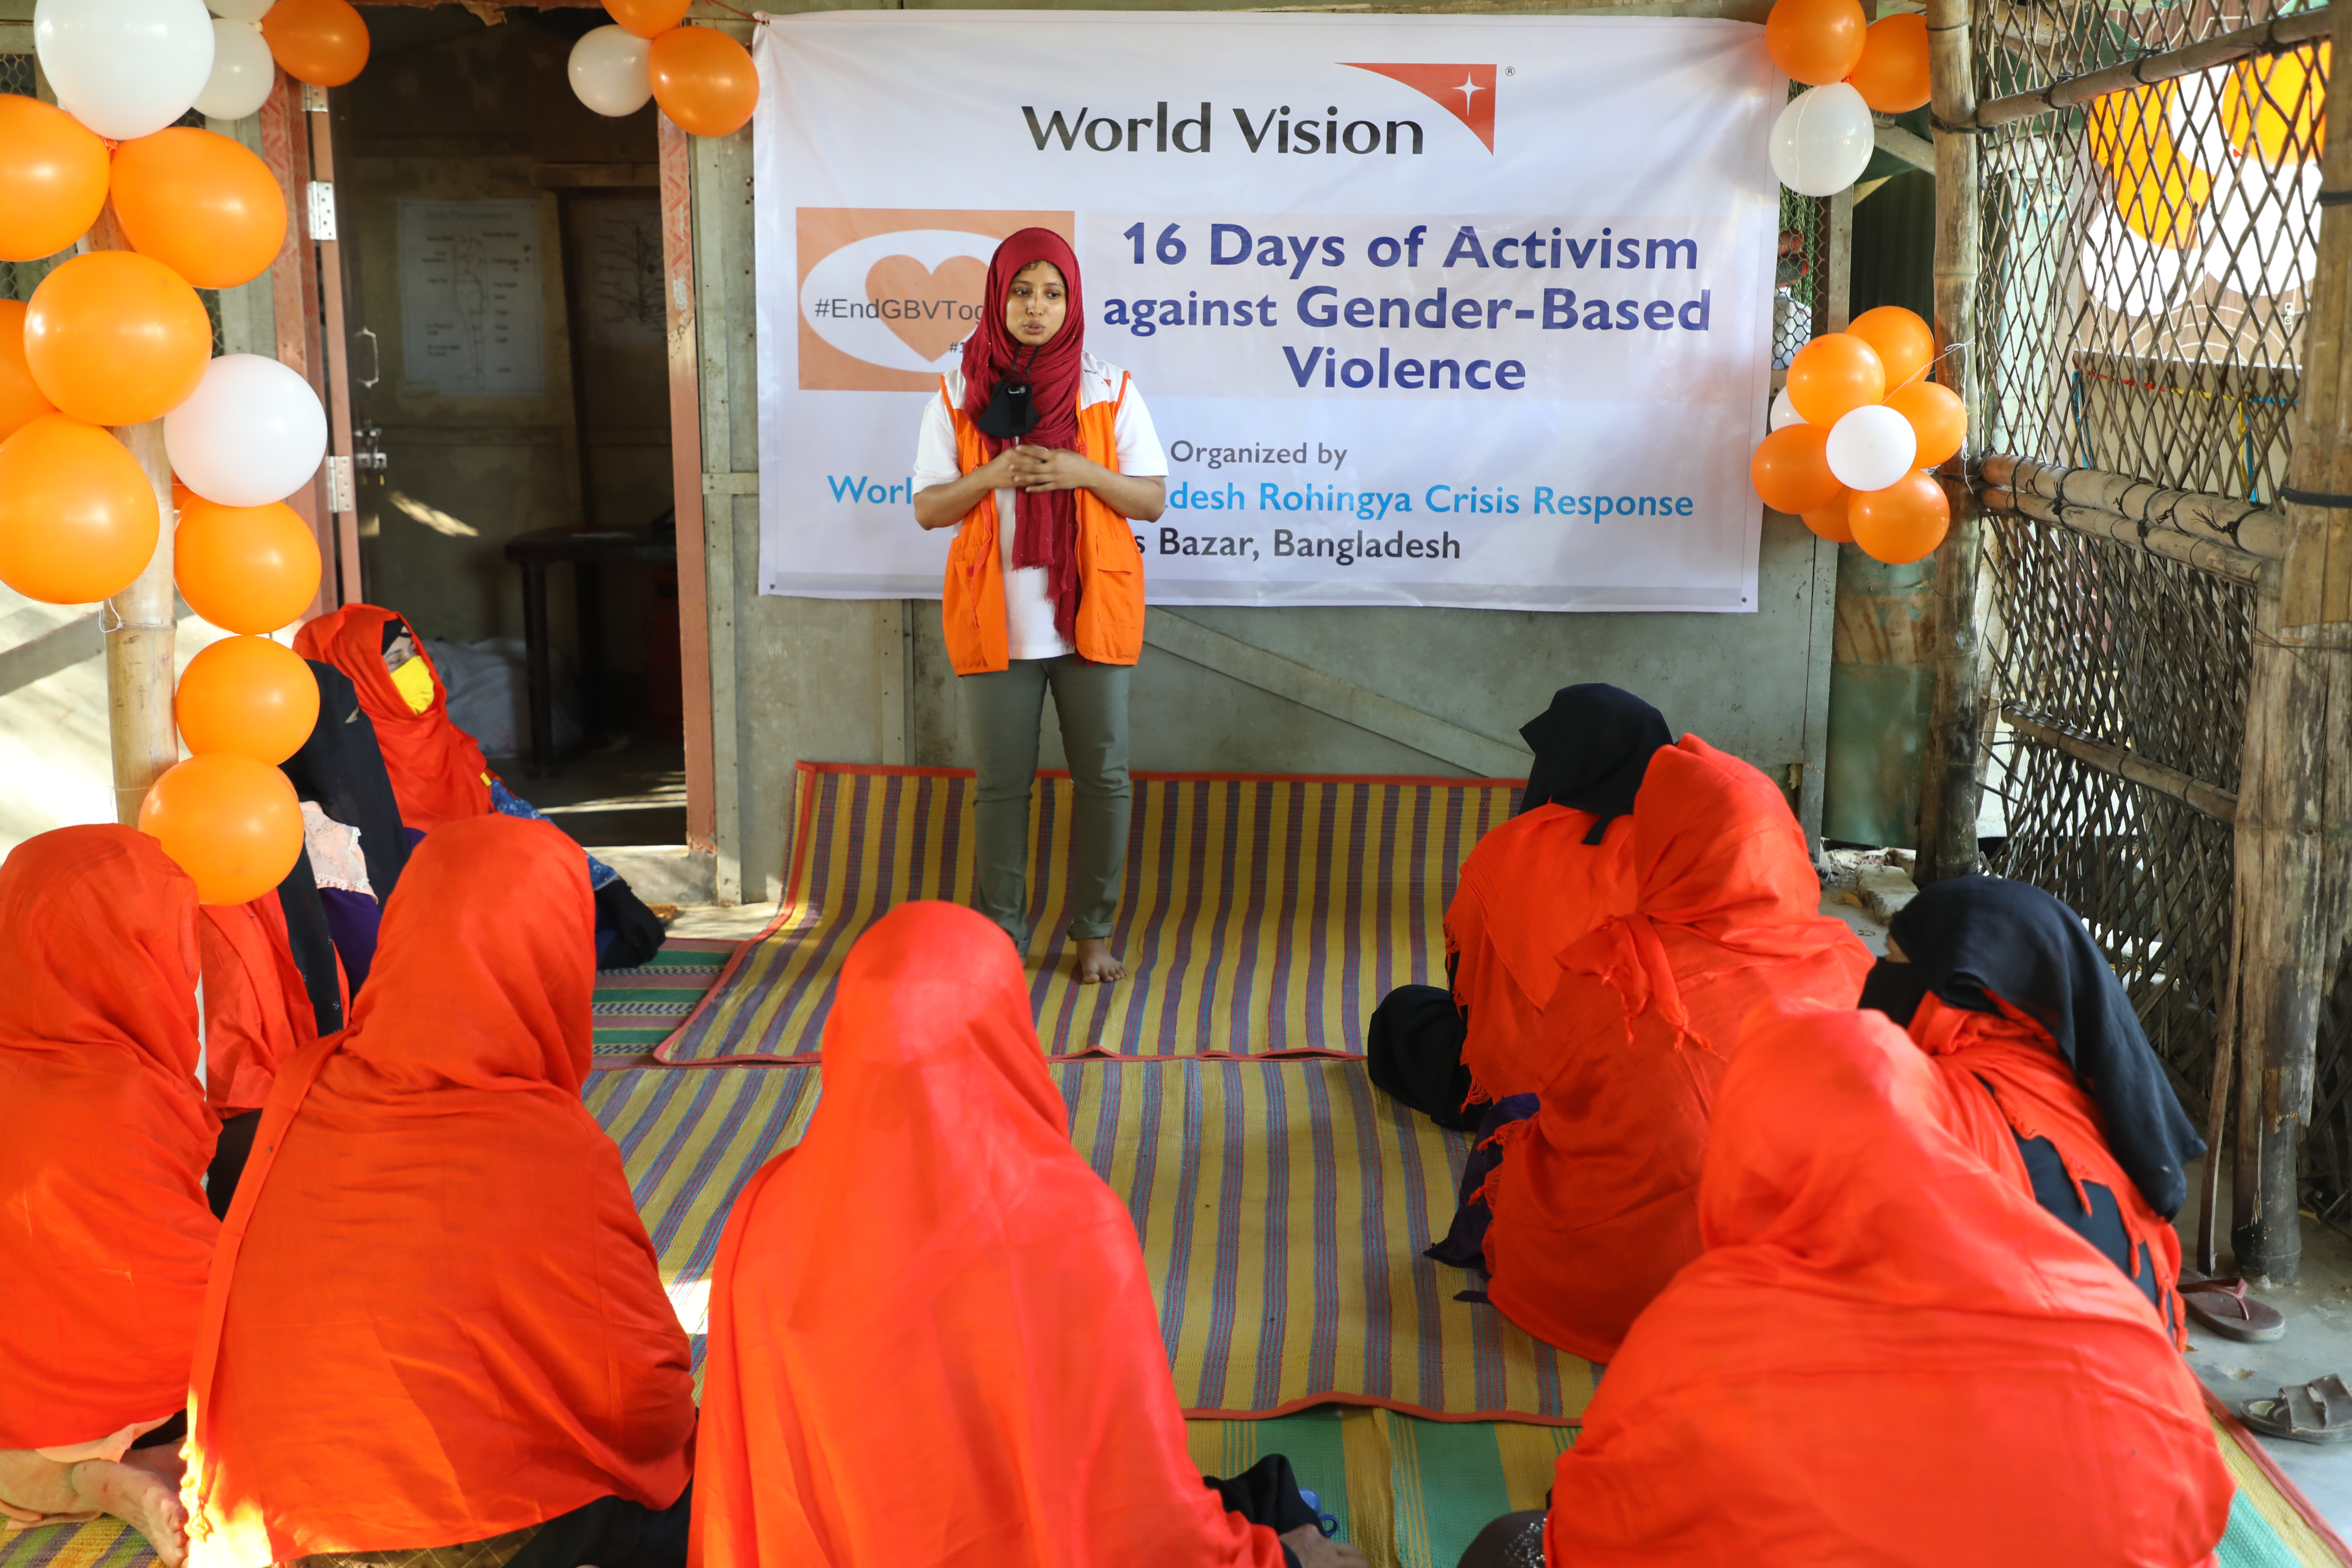 Rohingya Refugee women and girl during a gender based violence awareness training event